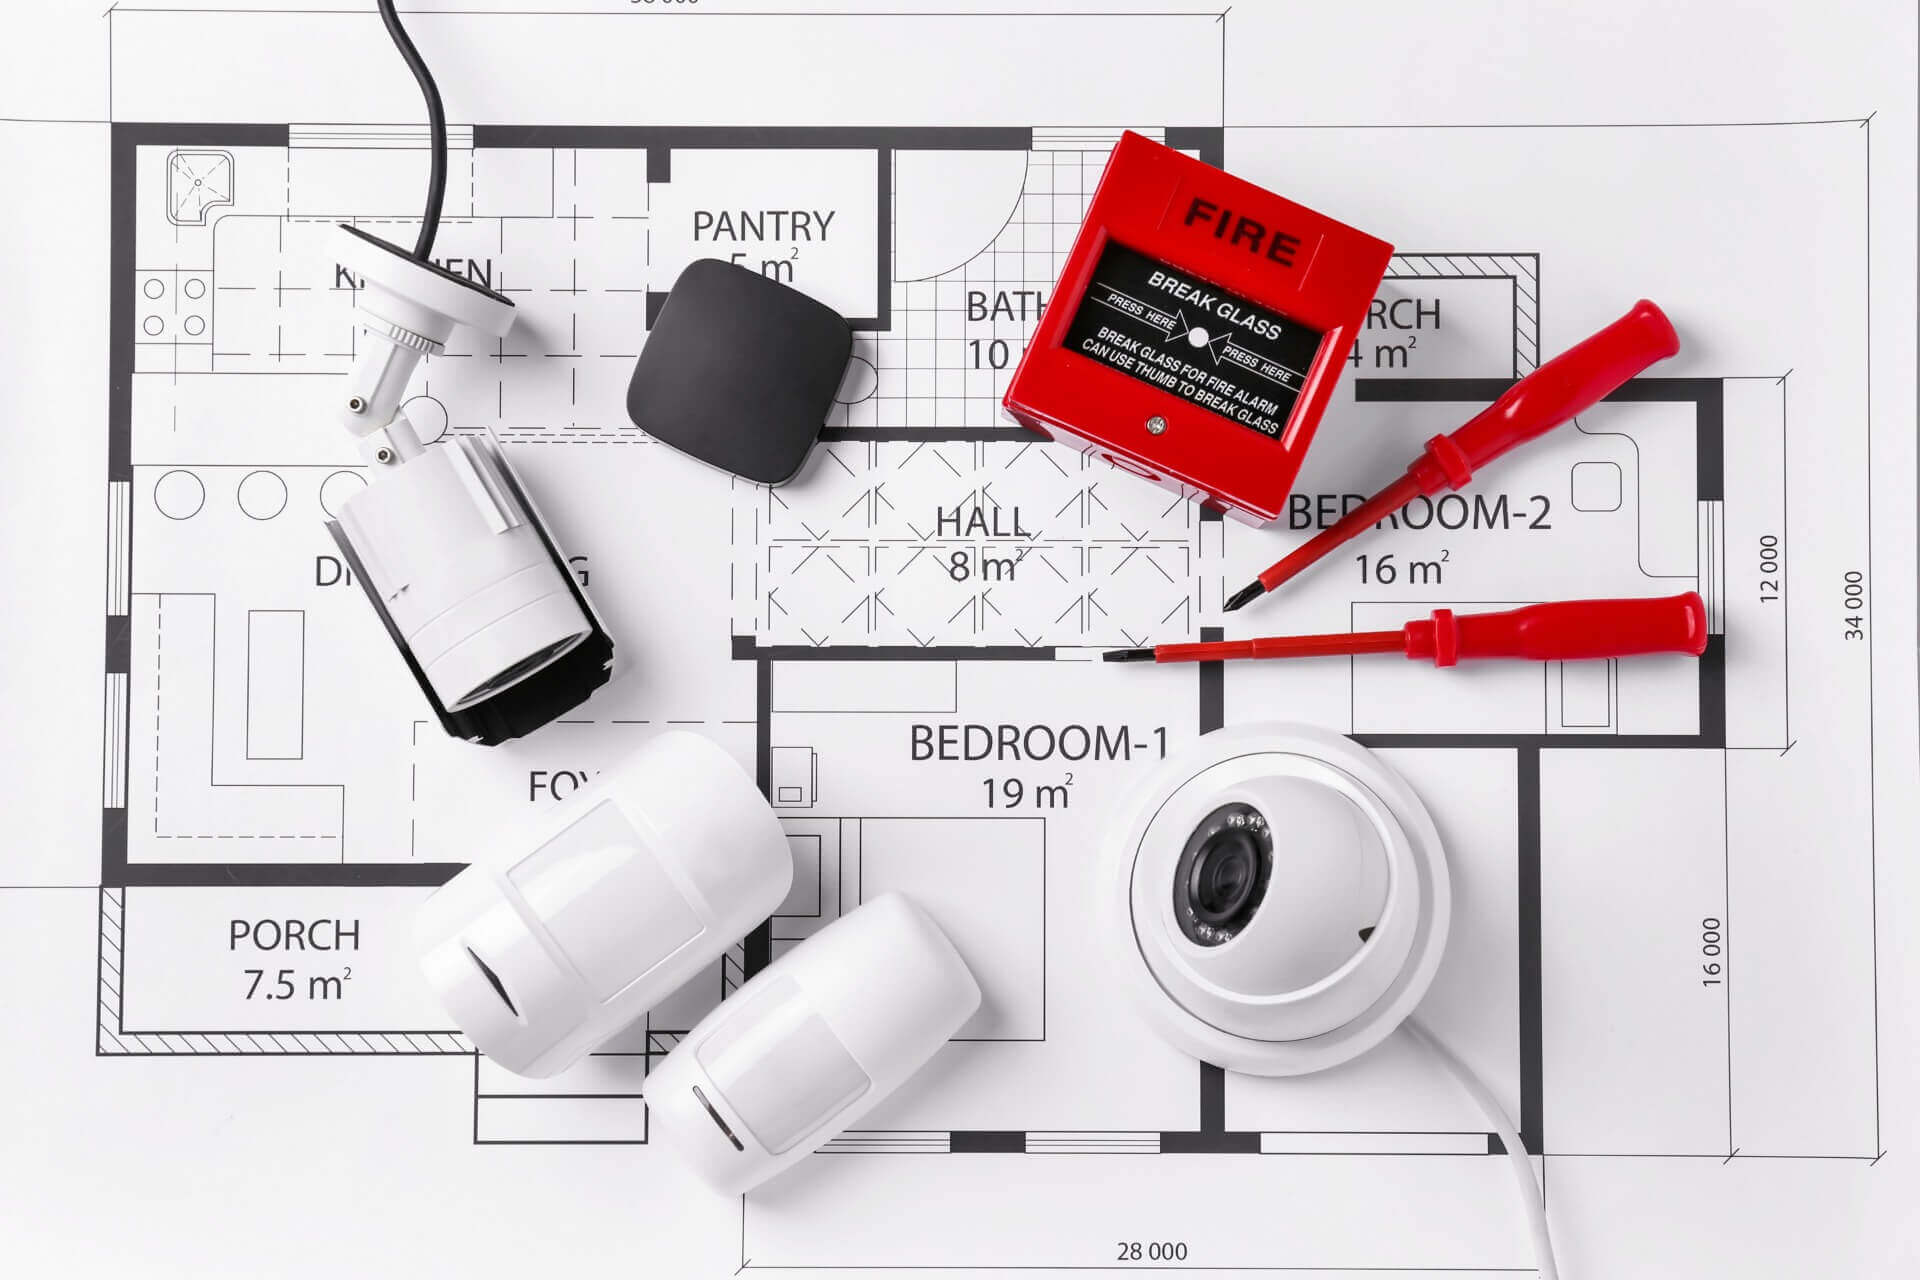 What is the reason for installing a fire alarm system?